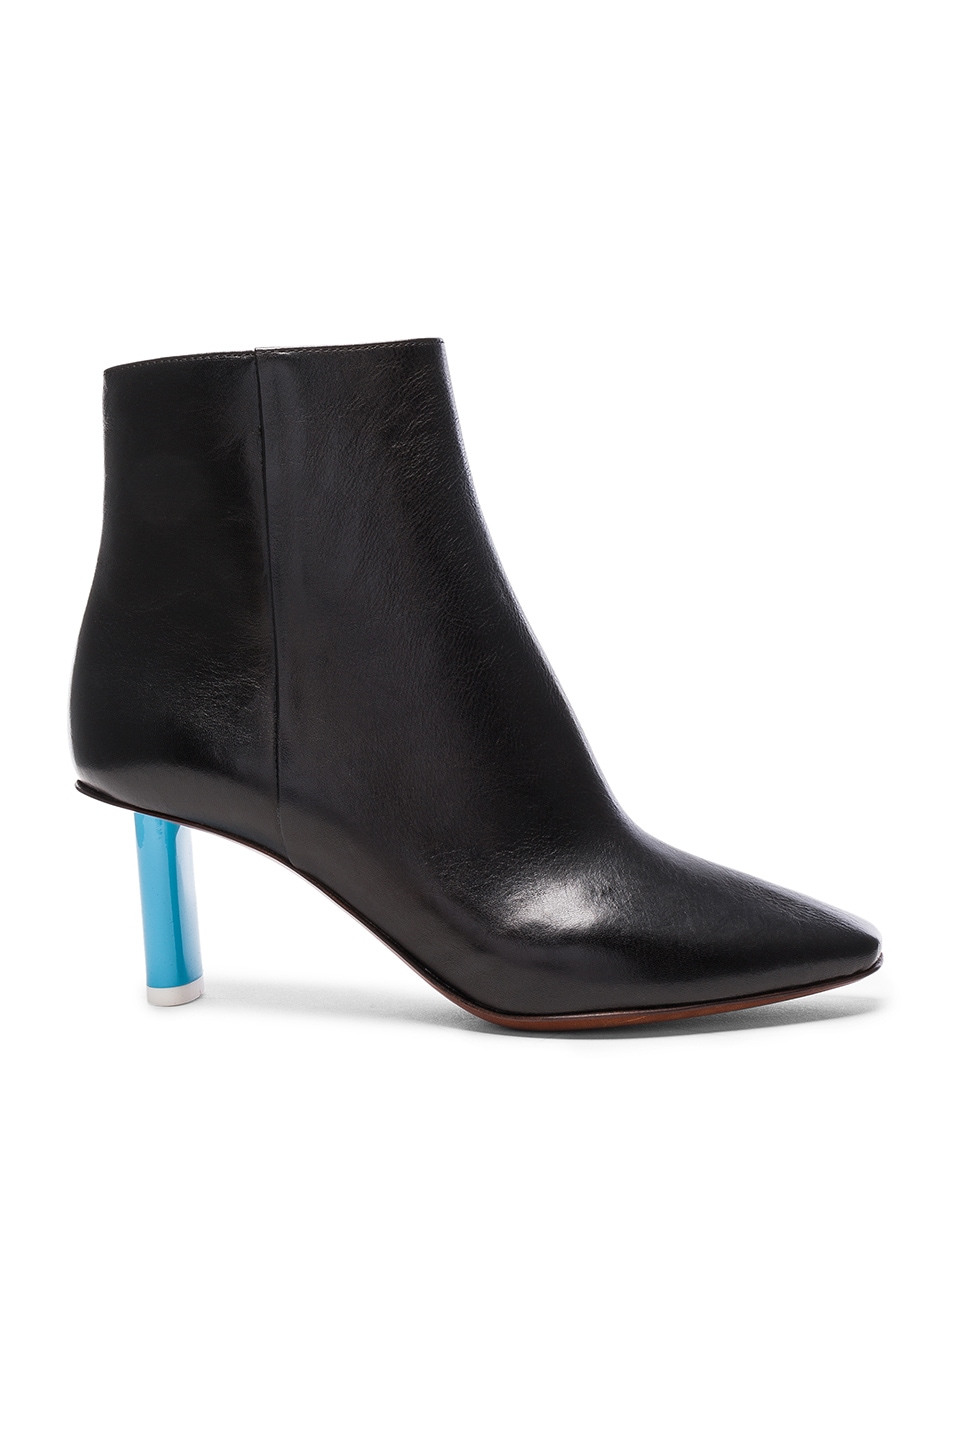 Image 1 of VETEMENTS Leather Ankle Boots in Black & Blue